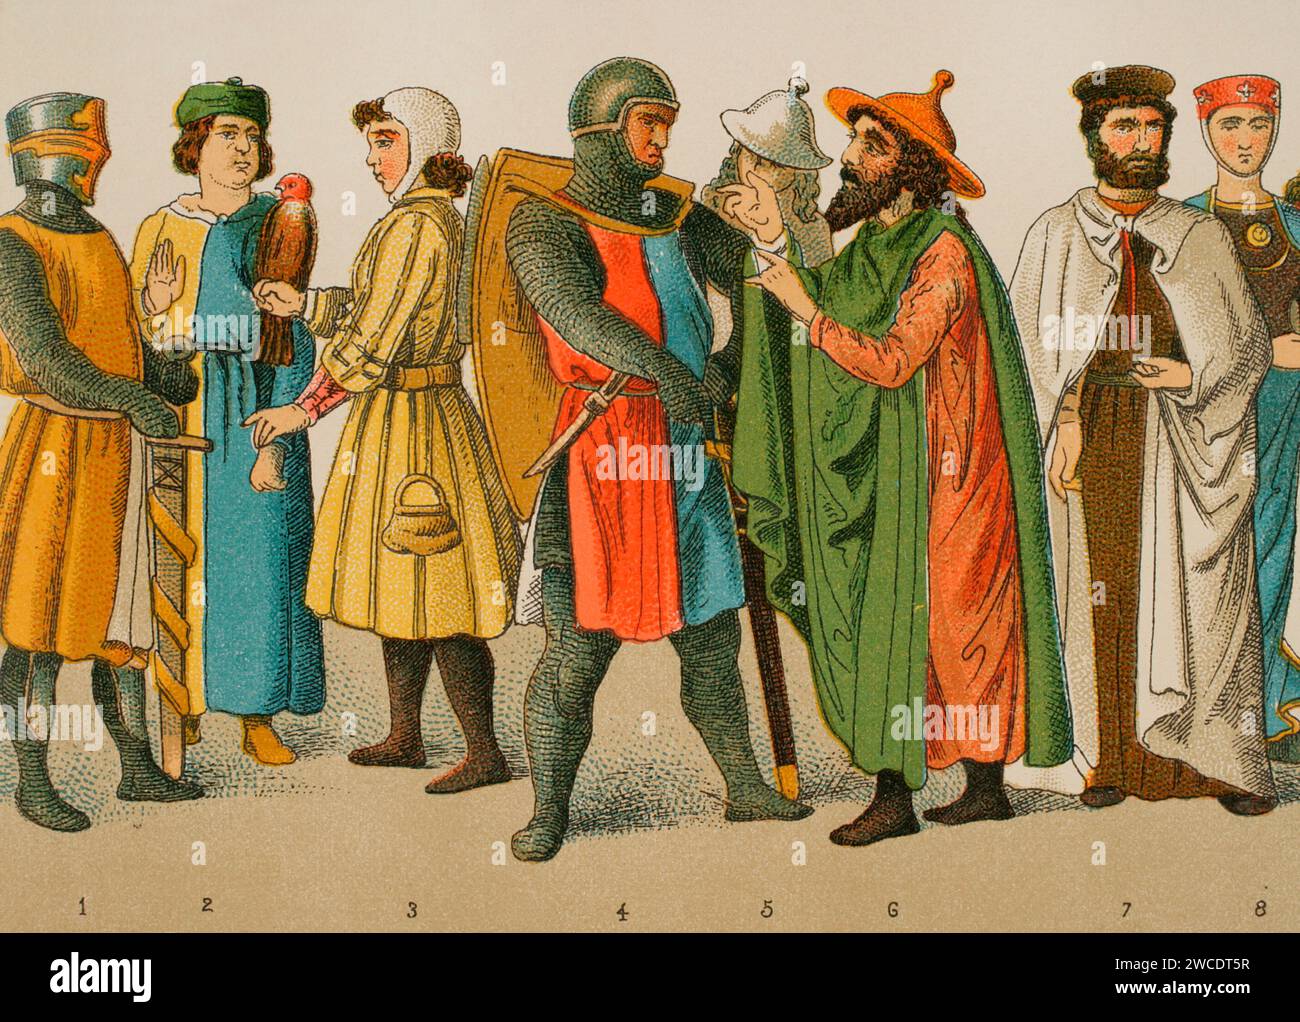 History of Germany. Middle Ages. 1200. From left to right, 1: knight, 2: physician, 3: falconer, 4: knight, 5-6: Jews, 7: Knight of the Teutonic Order, 8: noblewoman. Chromolithography. 'Historia Universal', by César Cantú. Volume X, 1881. Stock Photo